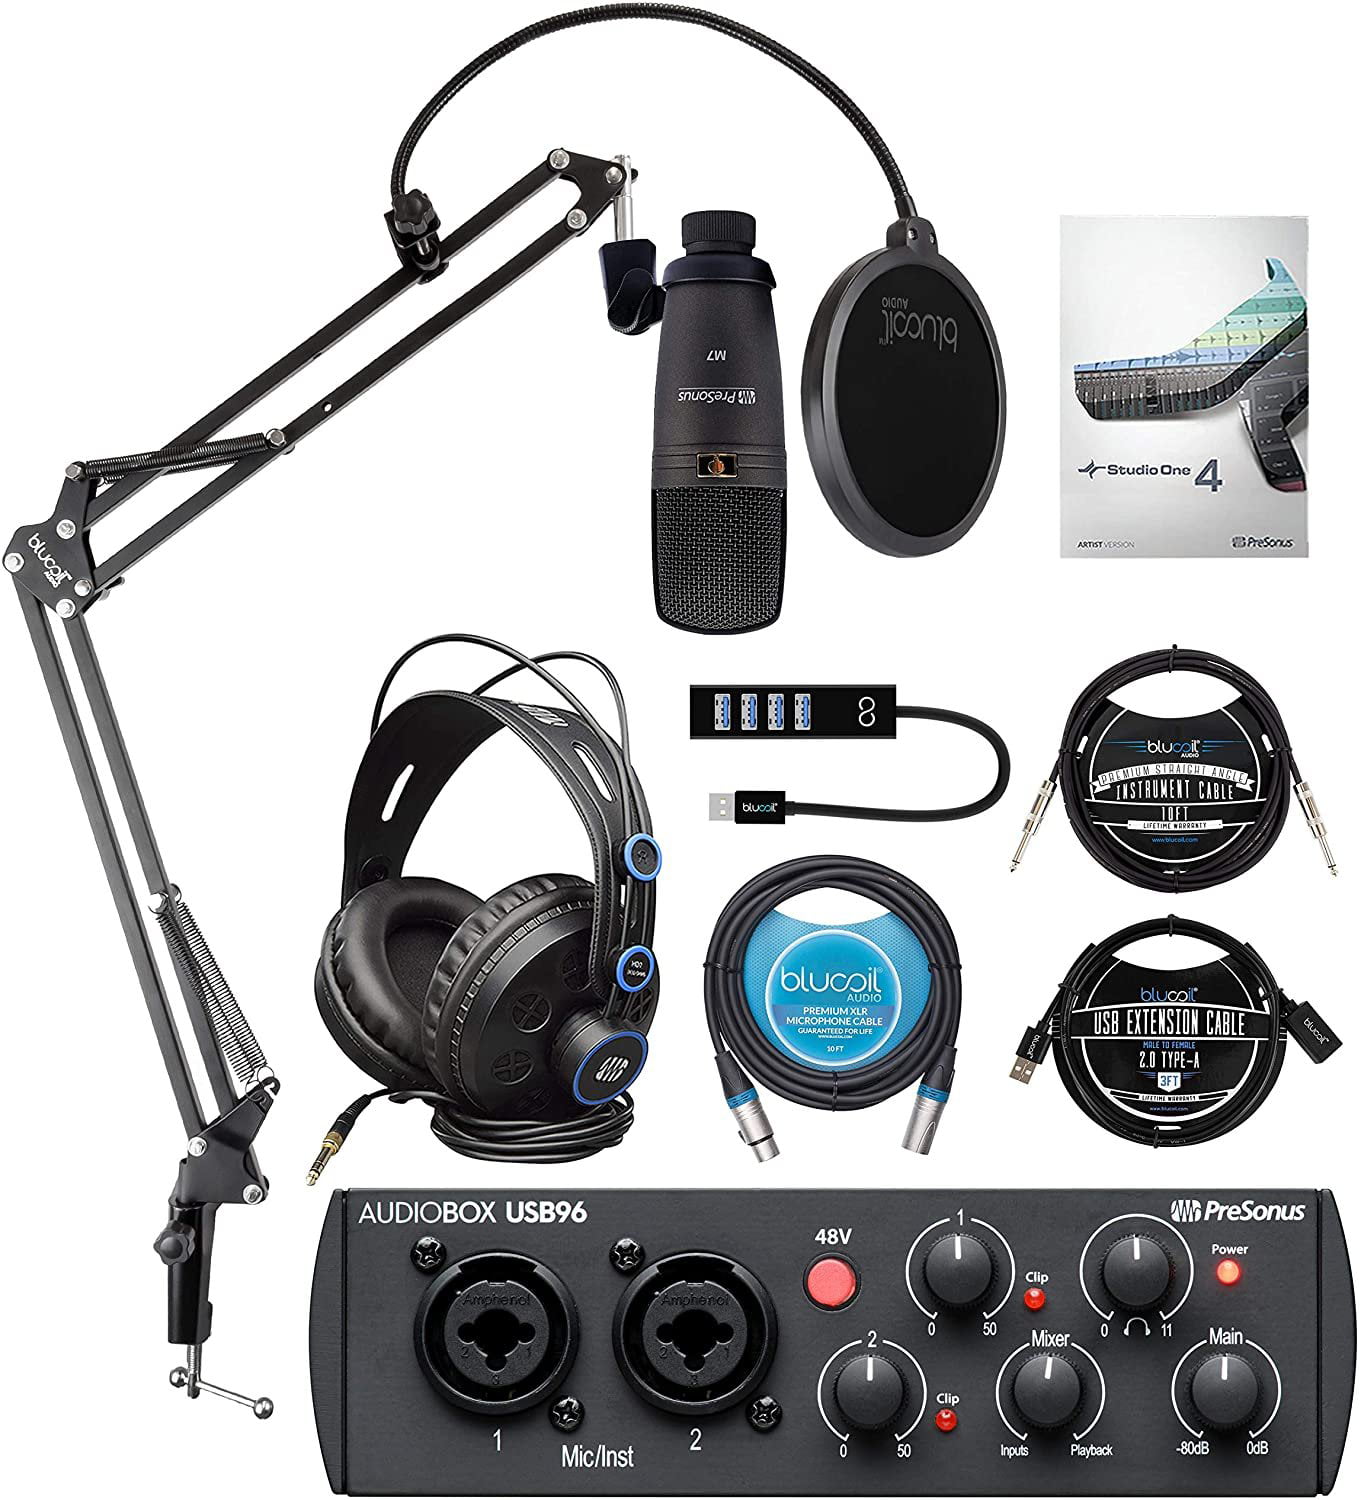 PreSonus AudioBox USB 96 Audio Interface 25th Anniversary Edition for Mac and Windows Bundle with Audio-Technica AT2020 Condenser Microphone Blucoil Boom Arm Plus Pop Filter and 10 XLR Cable 